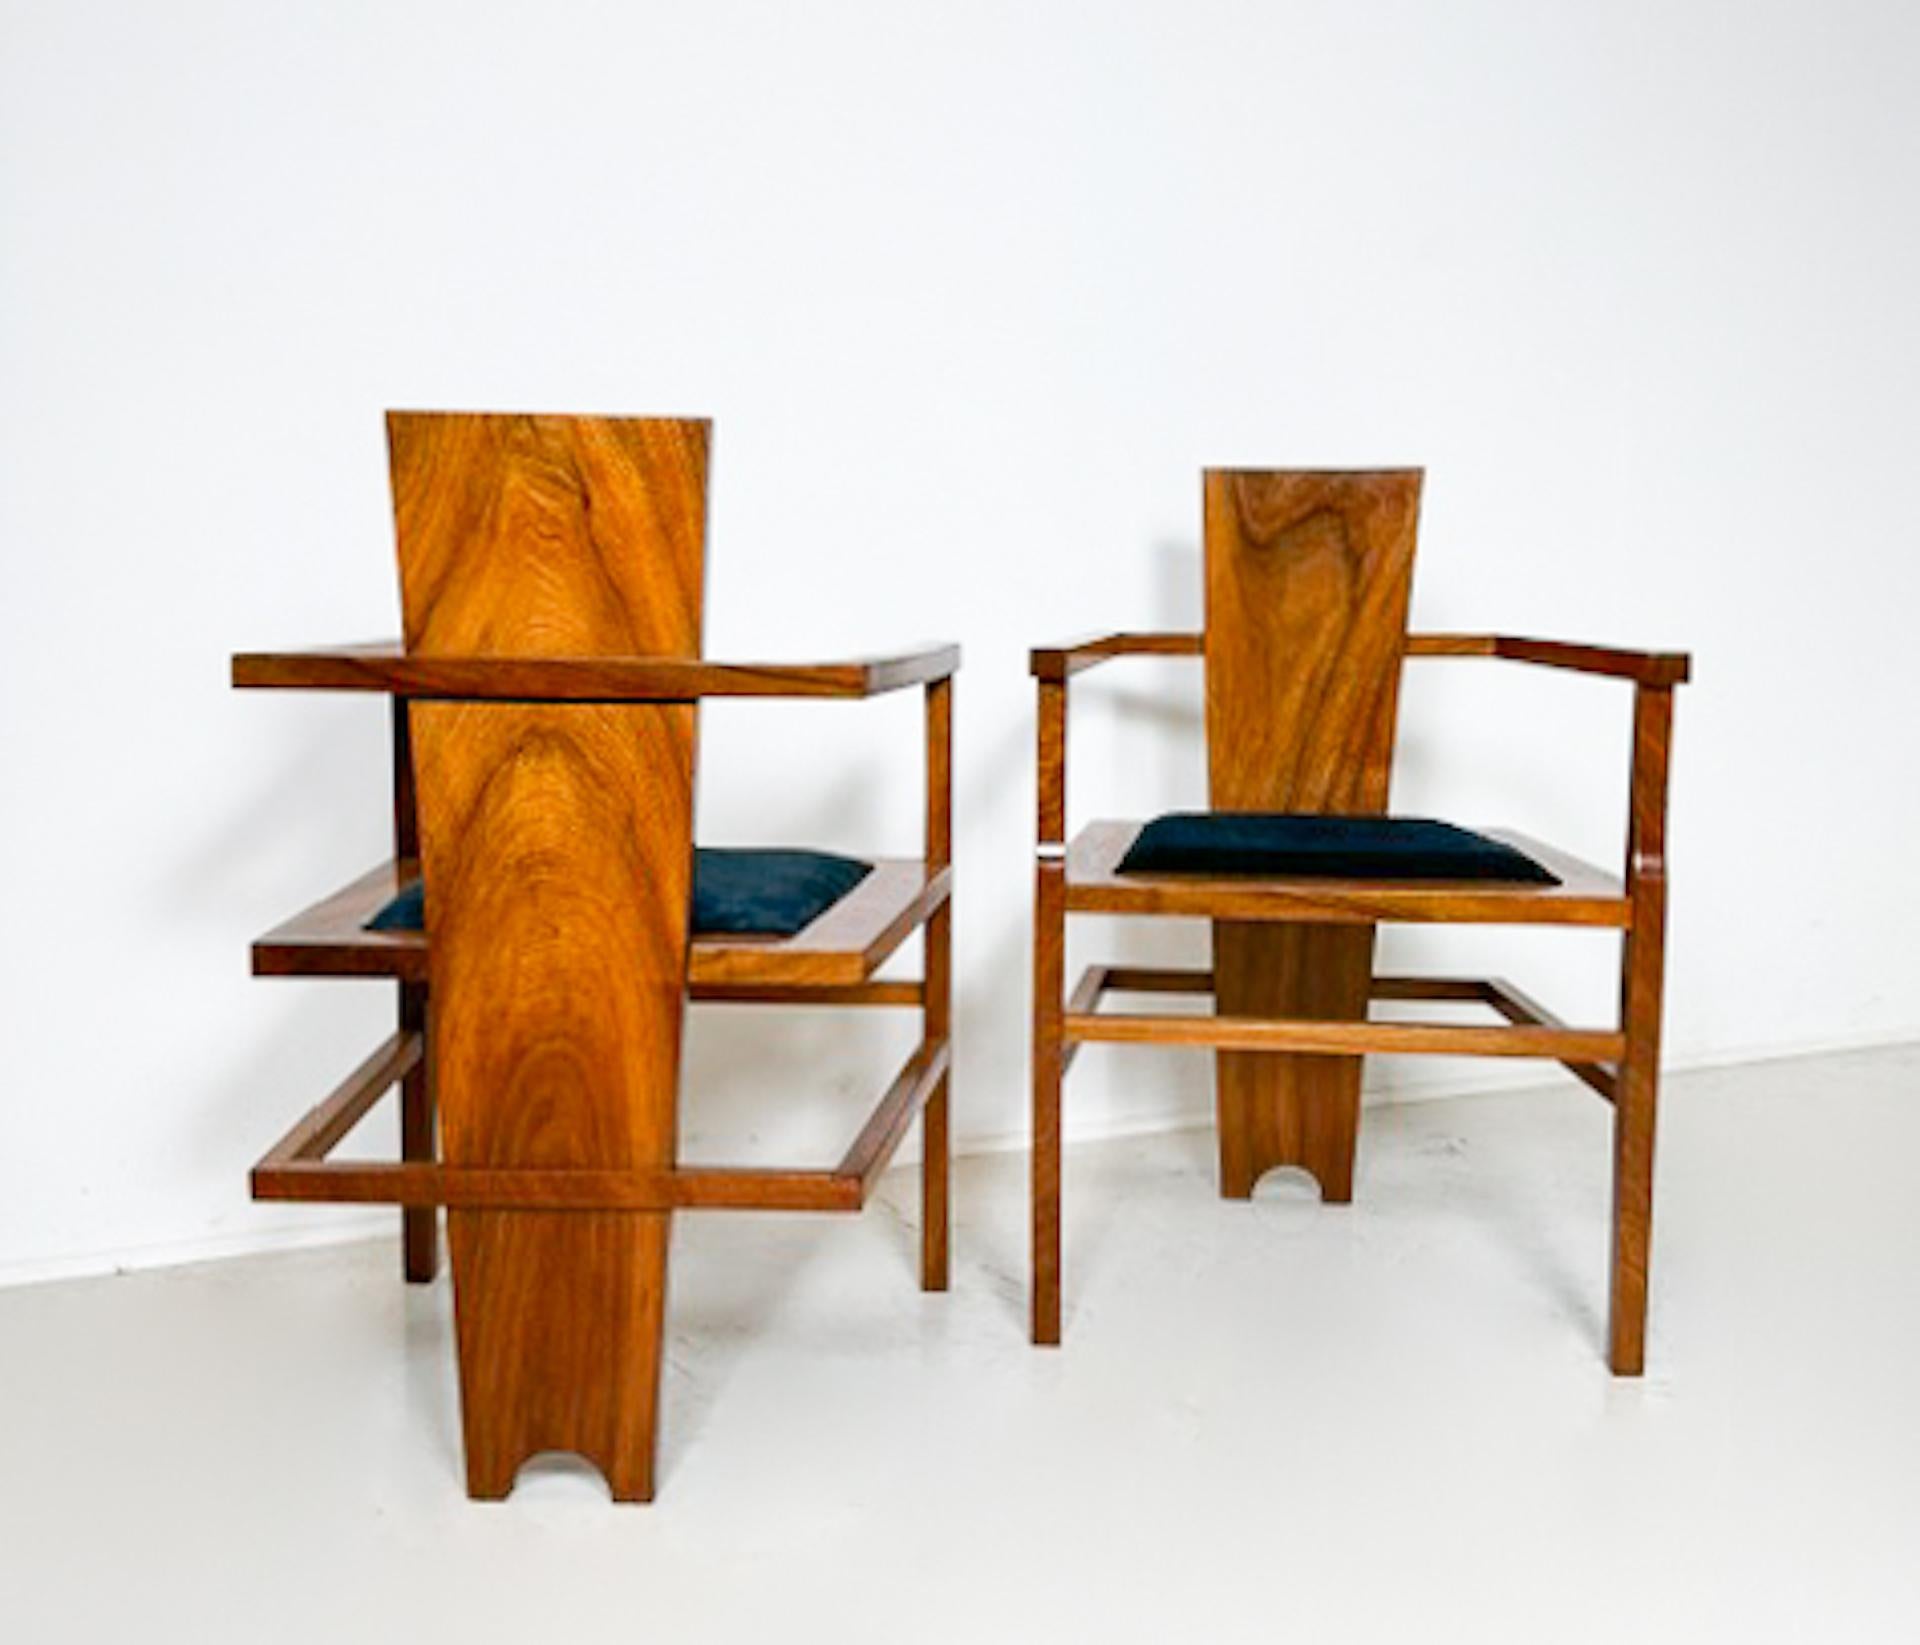 Pair of Constructivist Walnut Armchairs, 1940s For Sale 4